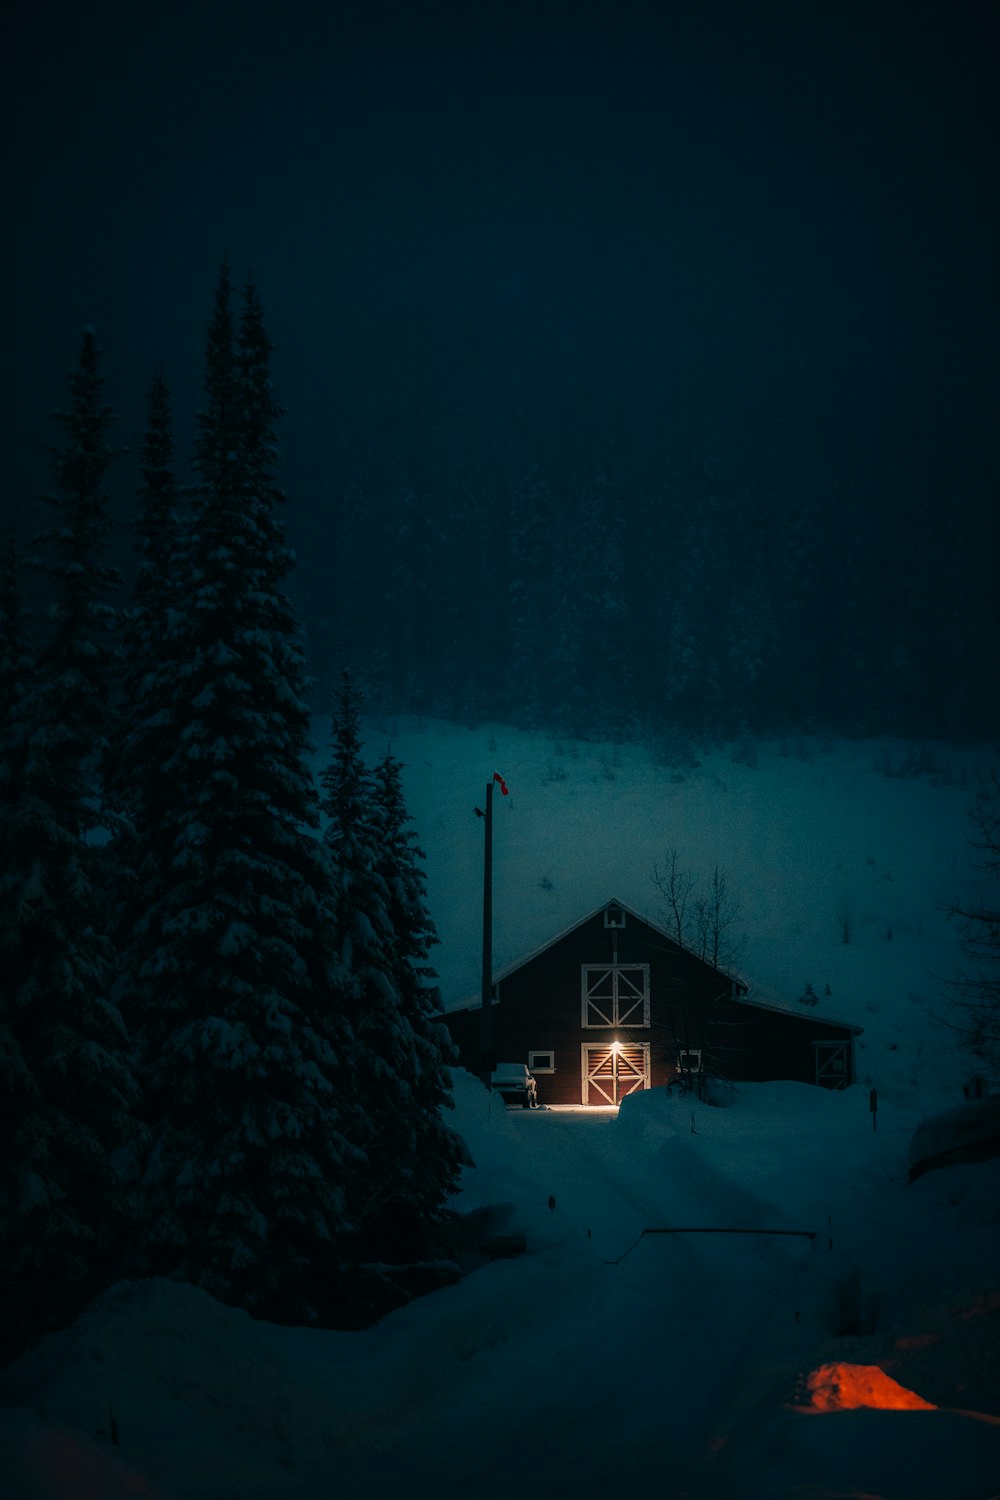 a cabin in the middle of a snowy forest at night